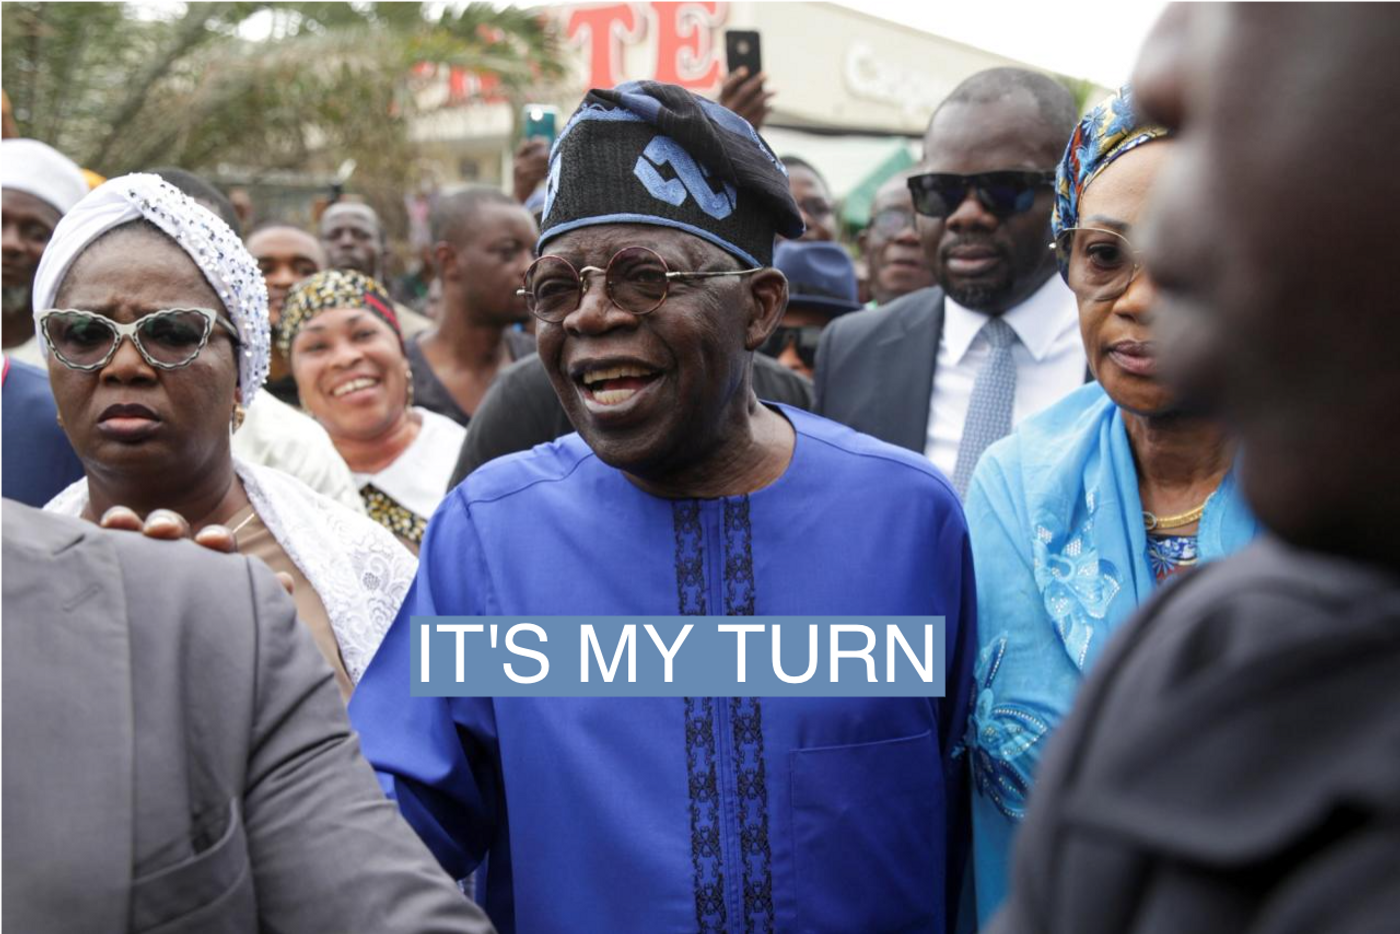 Presidential candidate Bola Ahmed Tinubu arrives at a polling station before casting his ballot in Ikeja, Lagos, Nigeria February 25, 2023 